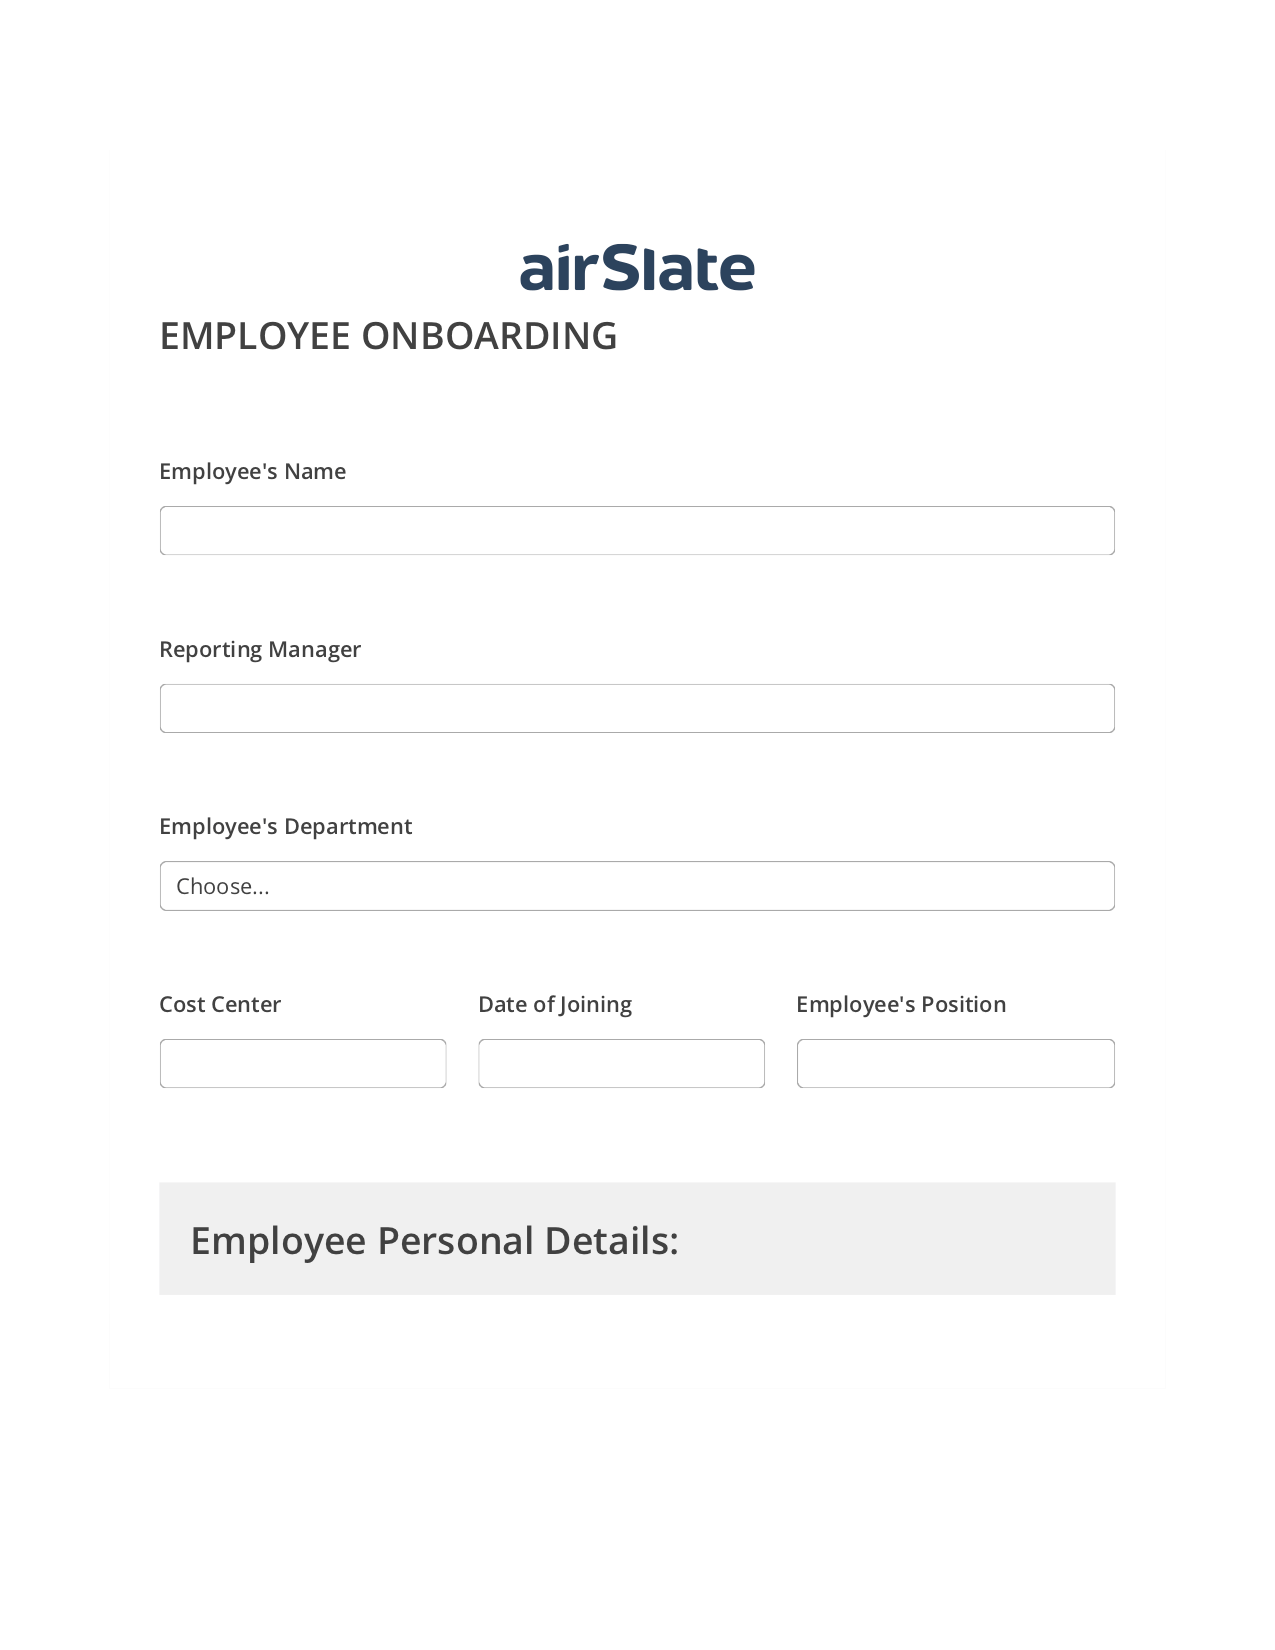 Employee Onboarding Workflow Pre-fill from Google Sheet Dropdown Options Bot, Remove Slate Bot, Export to Google Sheet Bot